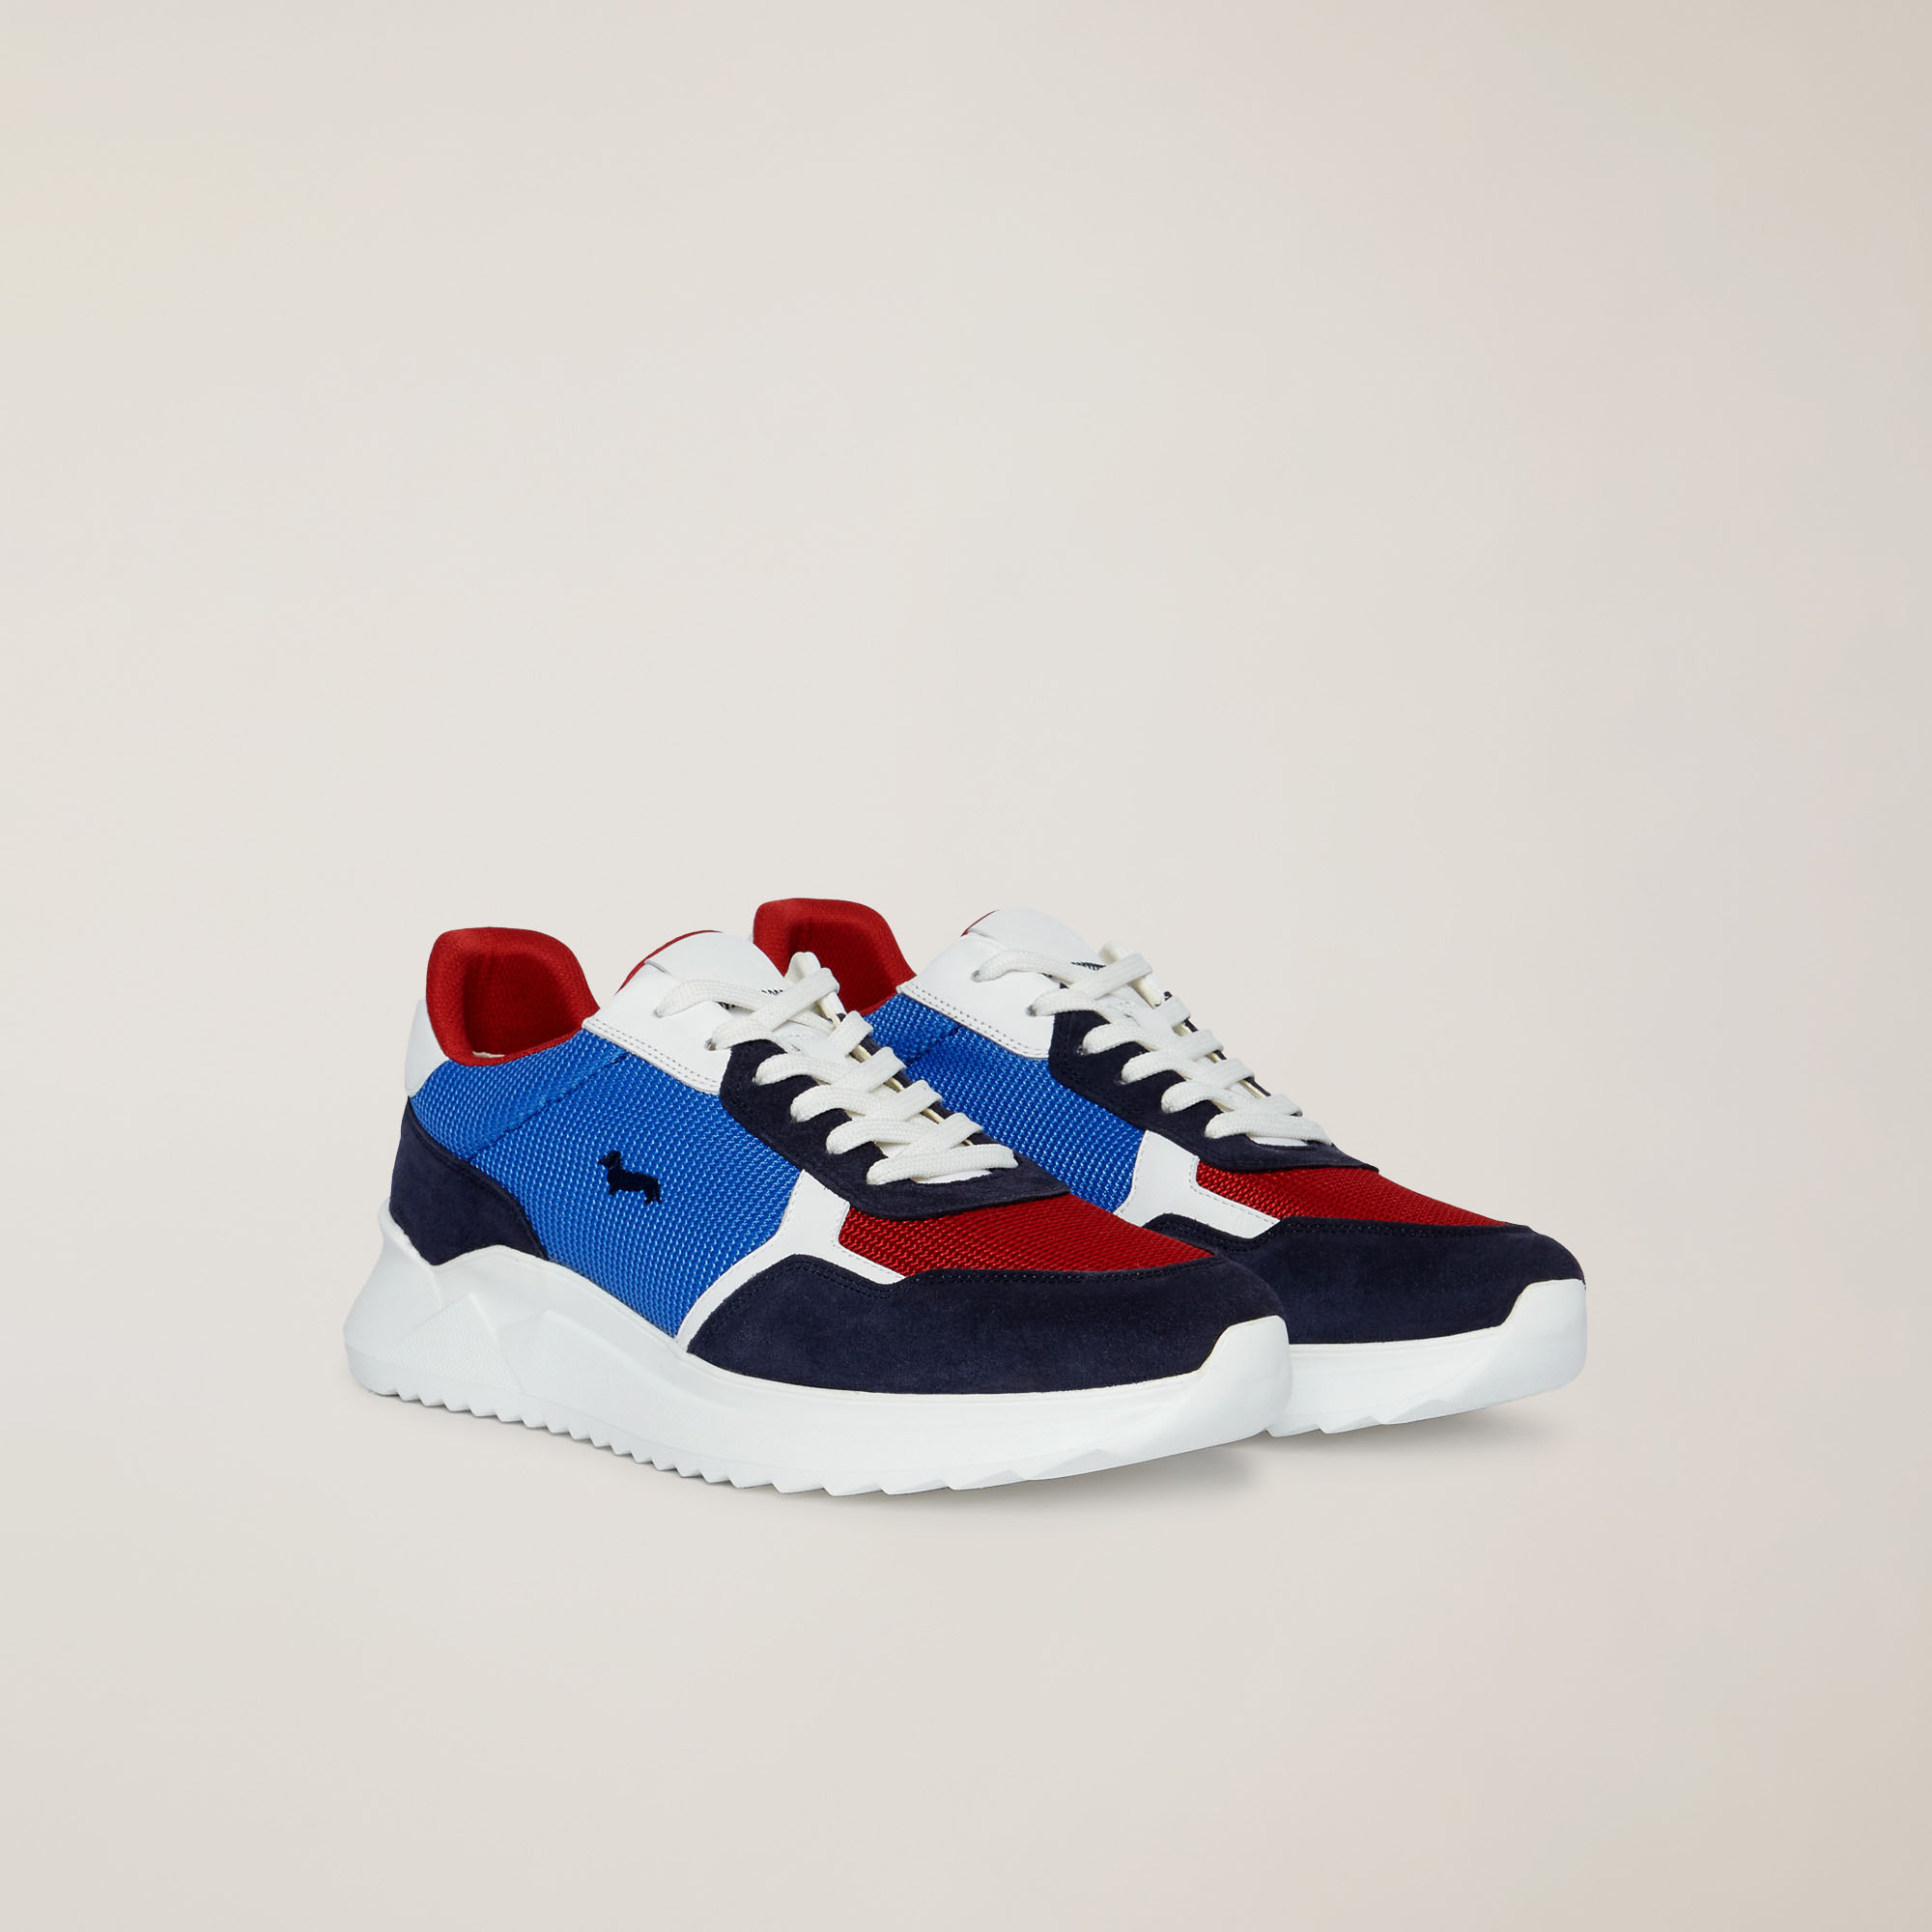 Sneaker mit Materialmix, Blau/Rot, large image number 1